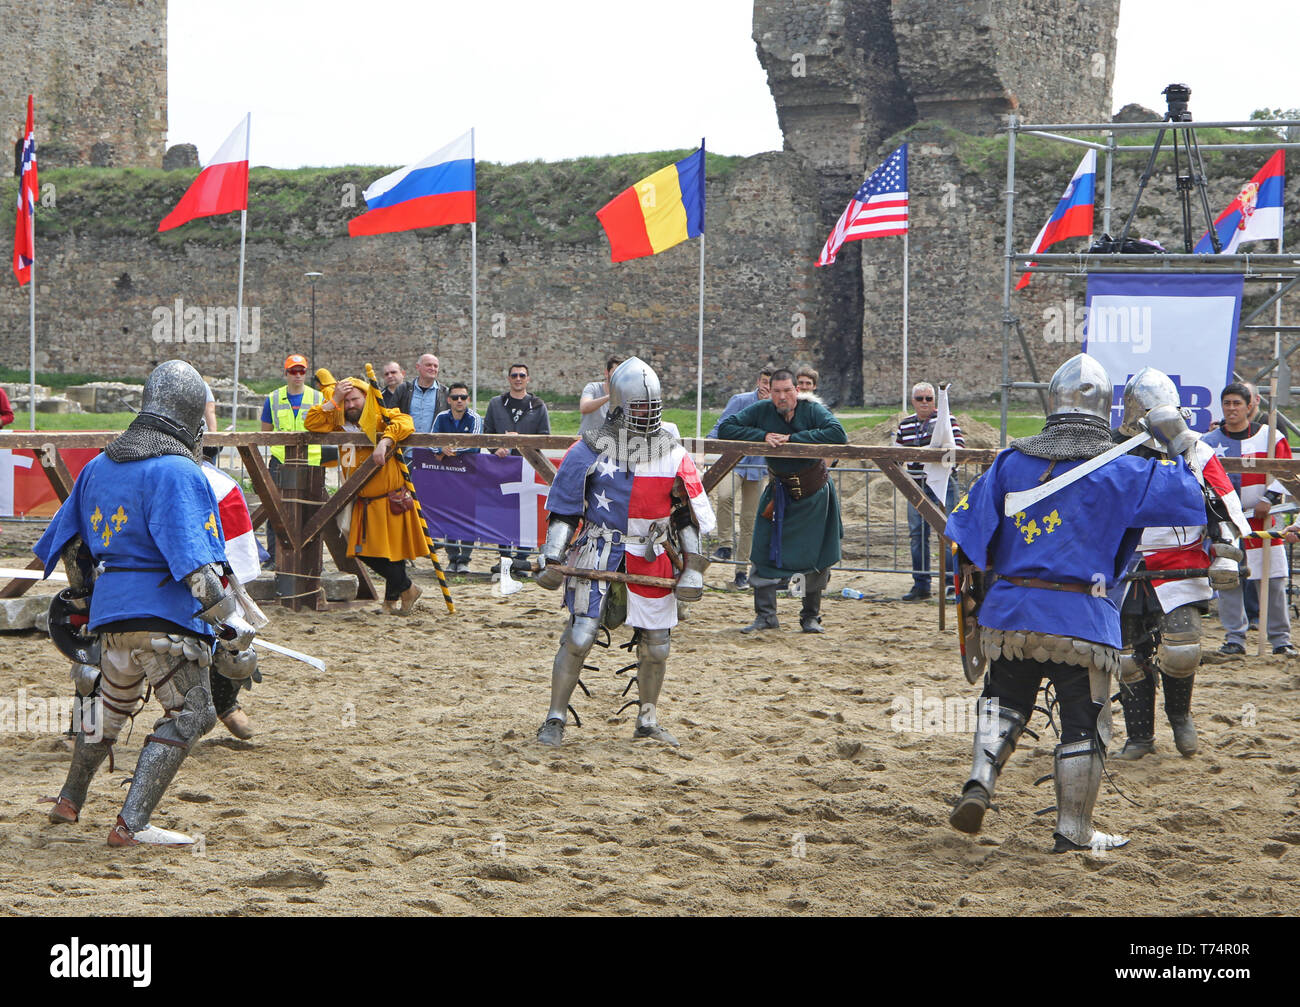 Smederevo. 2nd May, 2019. Competitors clash at the opening day of the 10th World National HMB (Historic Medieval Battle) Championship in Smederevo, Serbia on May 2, 2019. Fighters from 40 countries gathered in the Serbian city of Smederevo for an unusual international tournament that recreates historic battle techniques-the World National HMB Championship. The Chinese team is made up of 27 members, and it is China's third appearance at the event. Credit: Nemanja Cabric/Xinhua/Alamy Live News Stock Photo